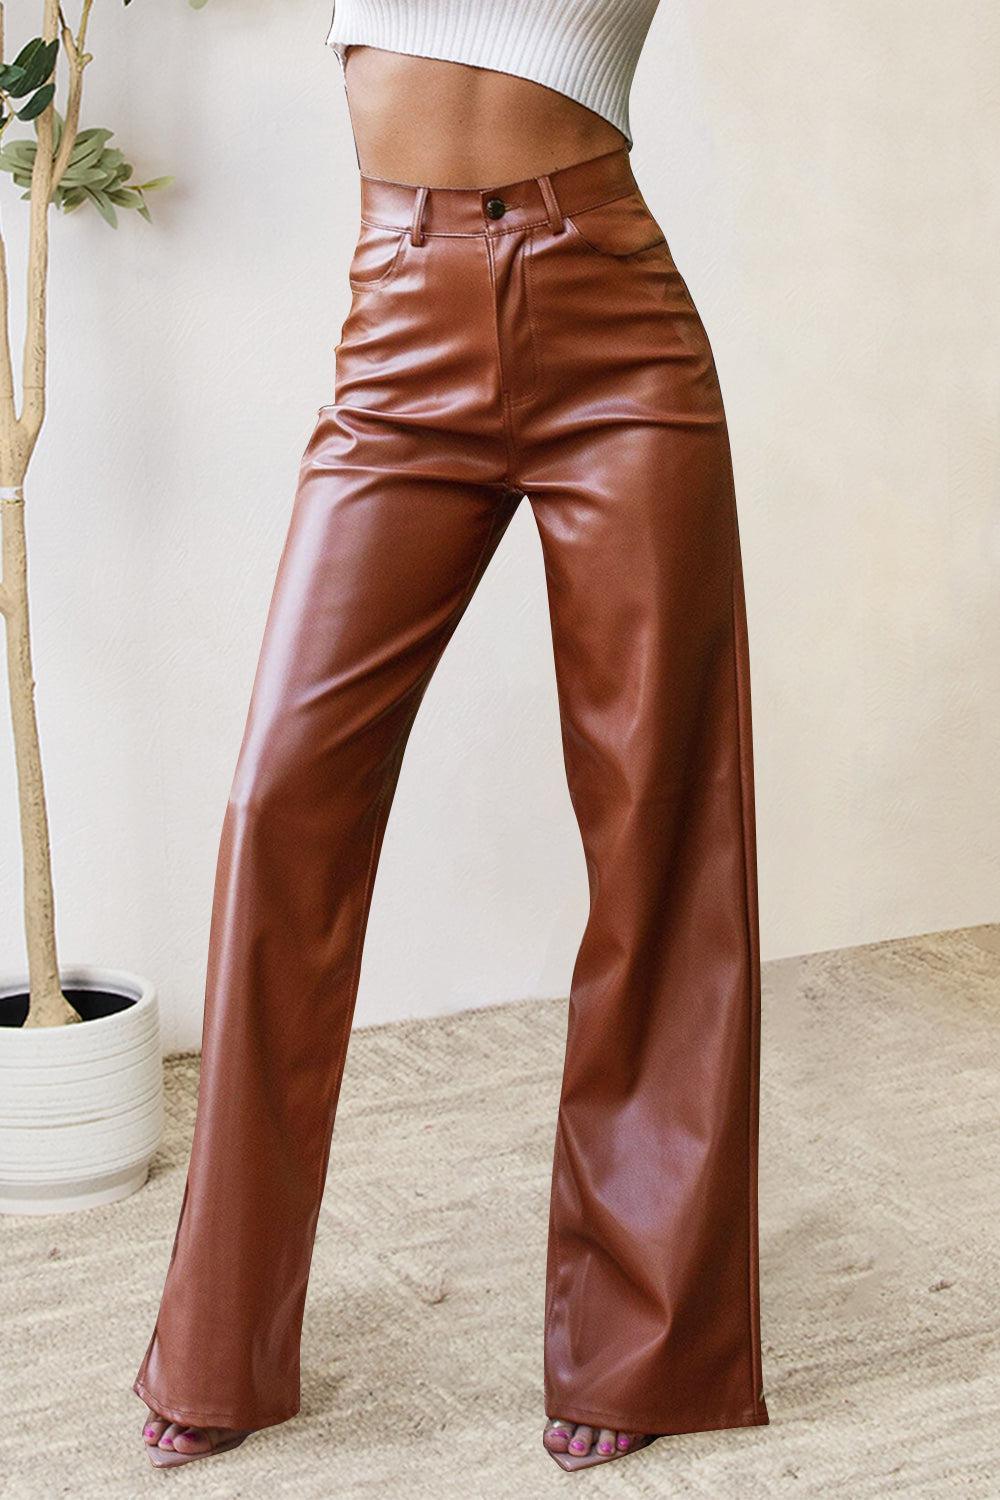 a woman in a white top and brown leather pants